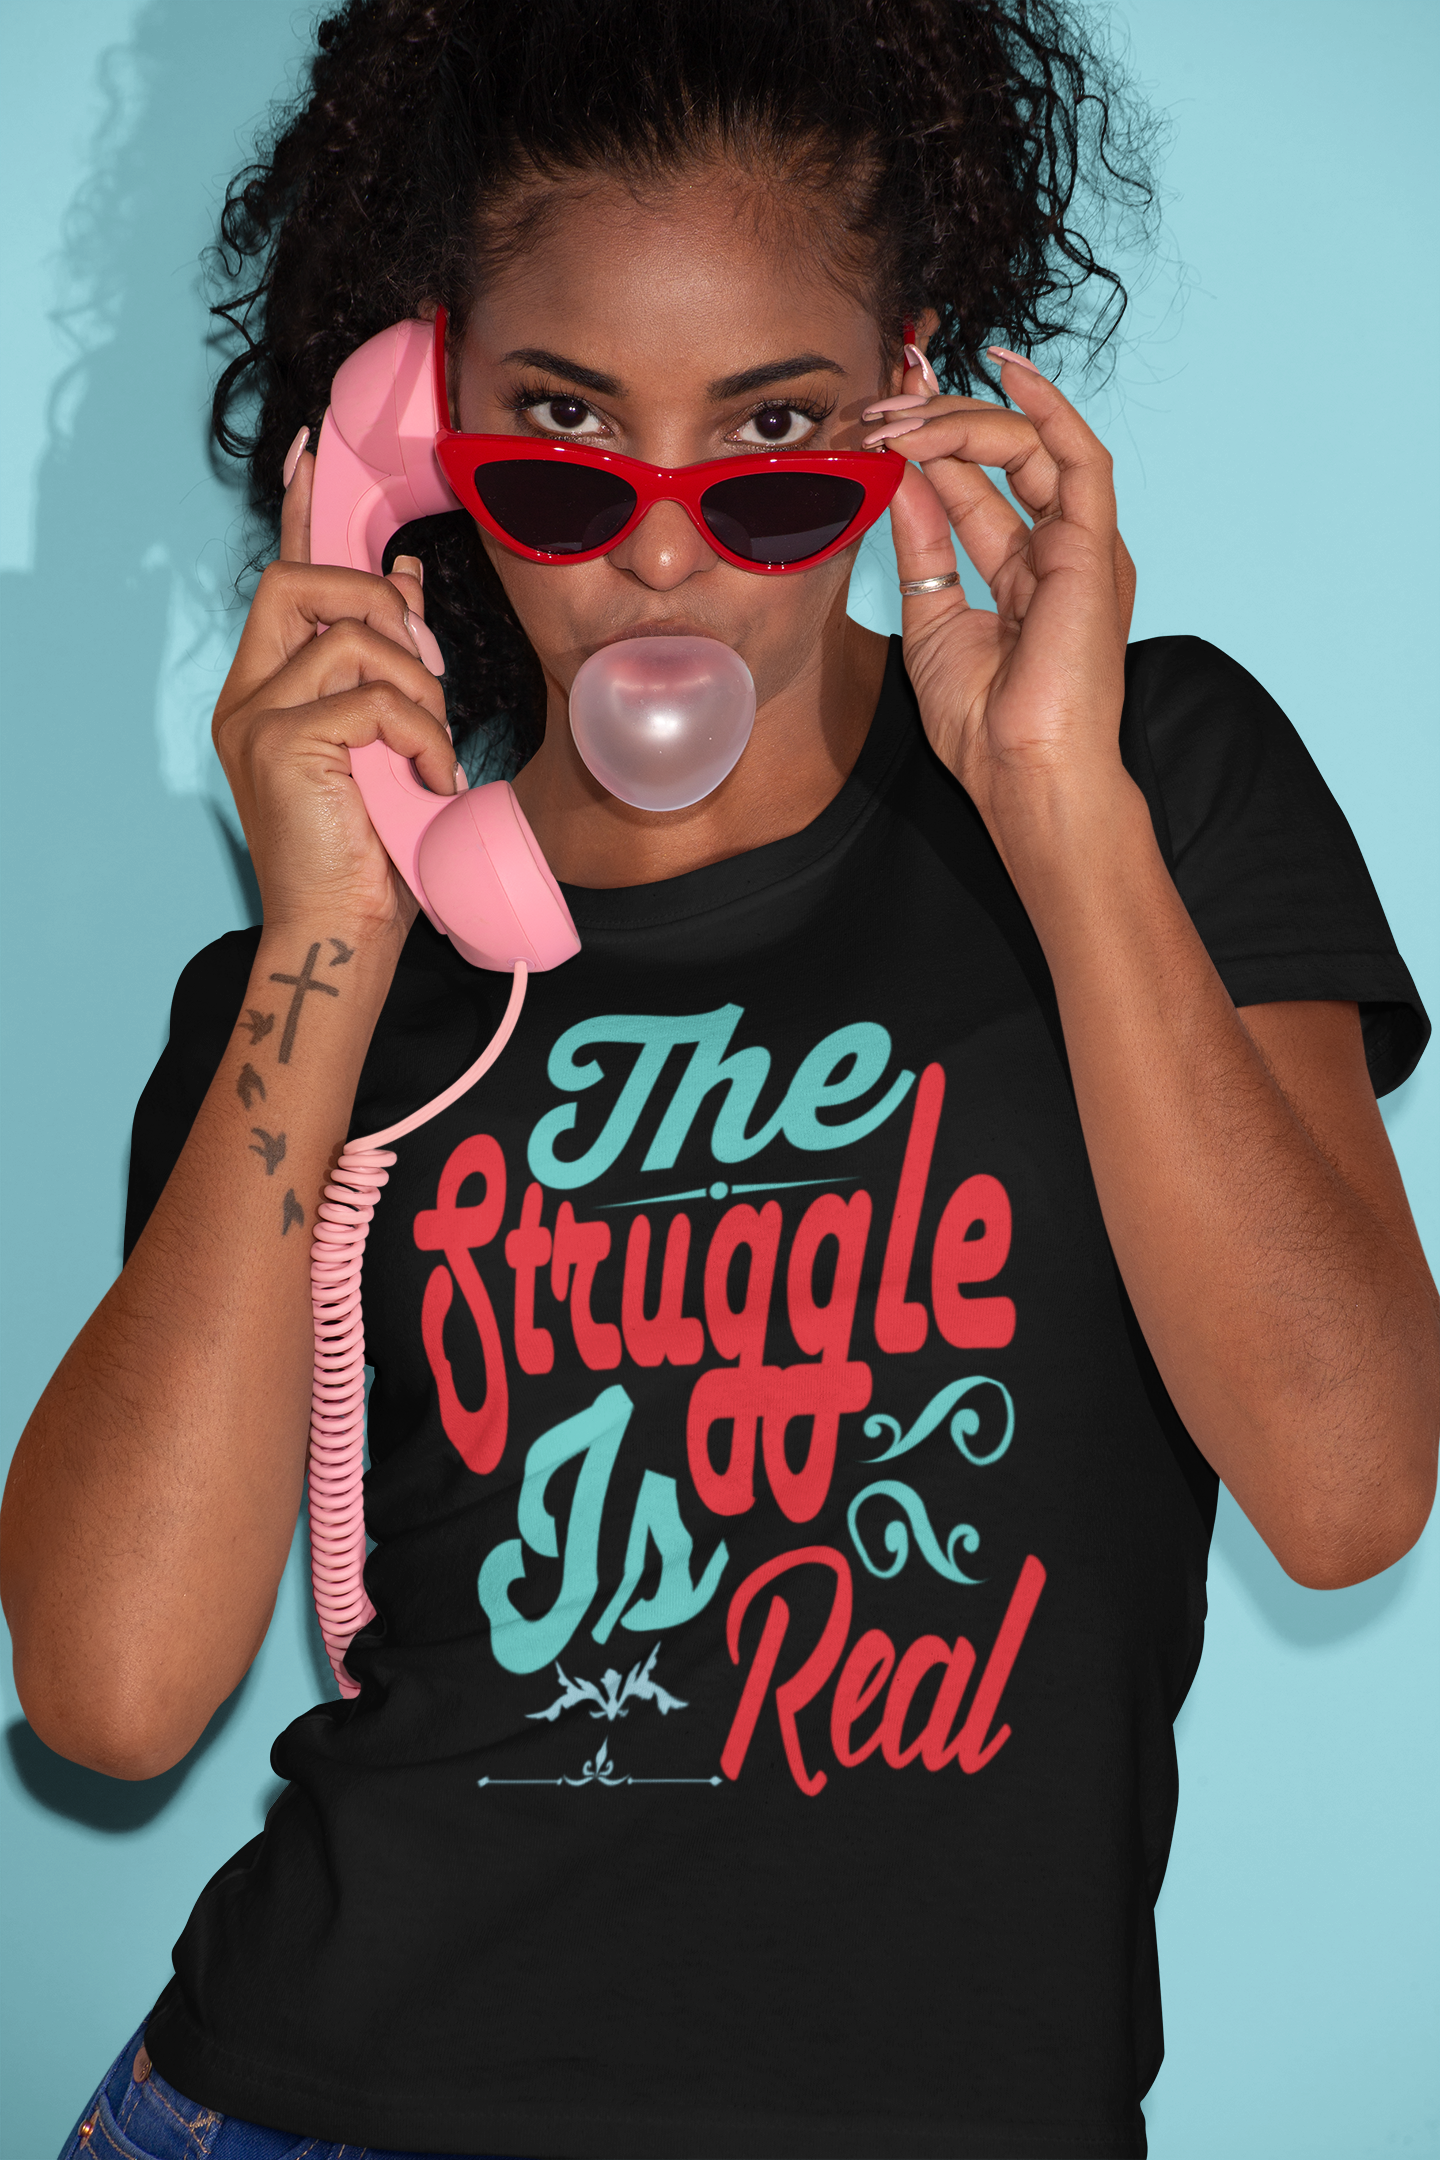 The Struggle Is Real - T-Shirt